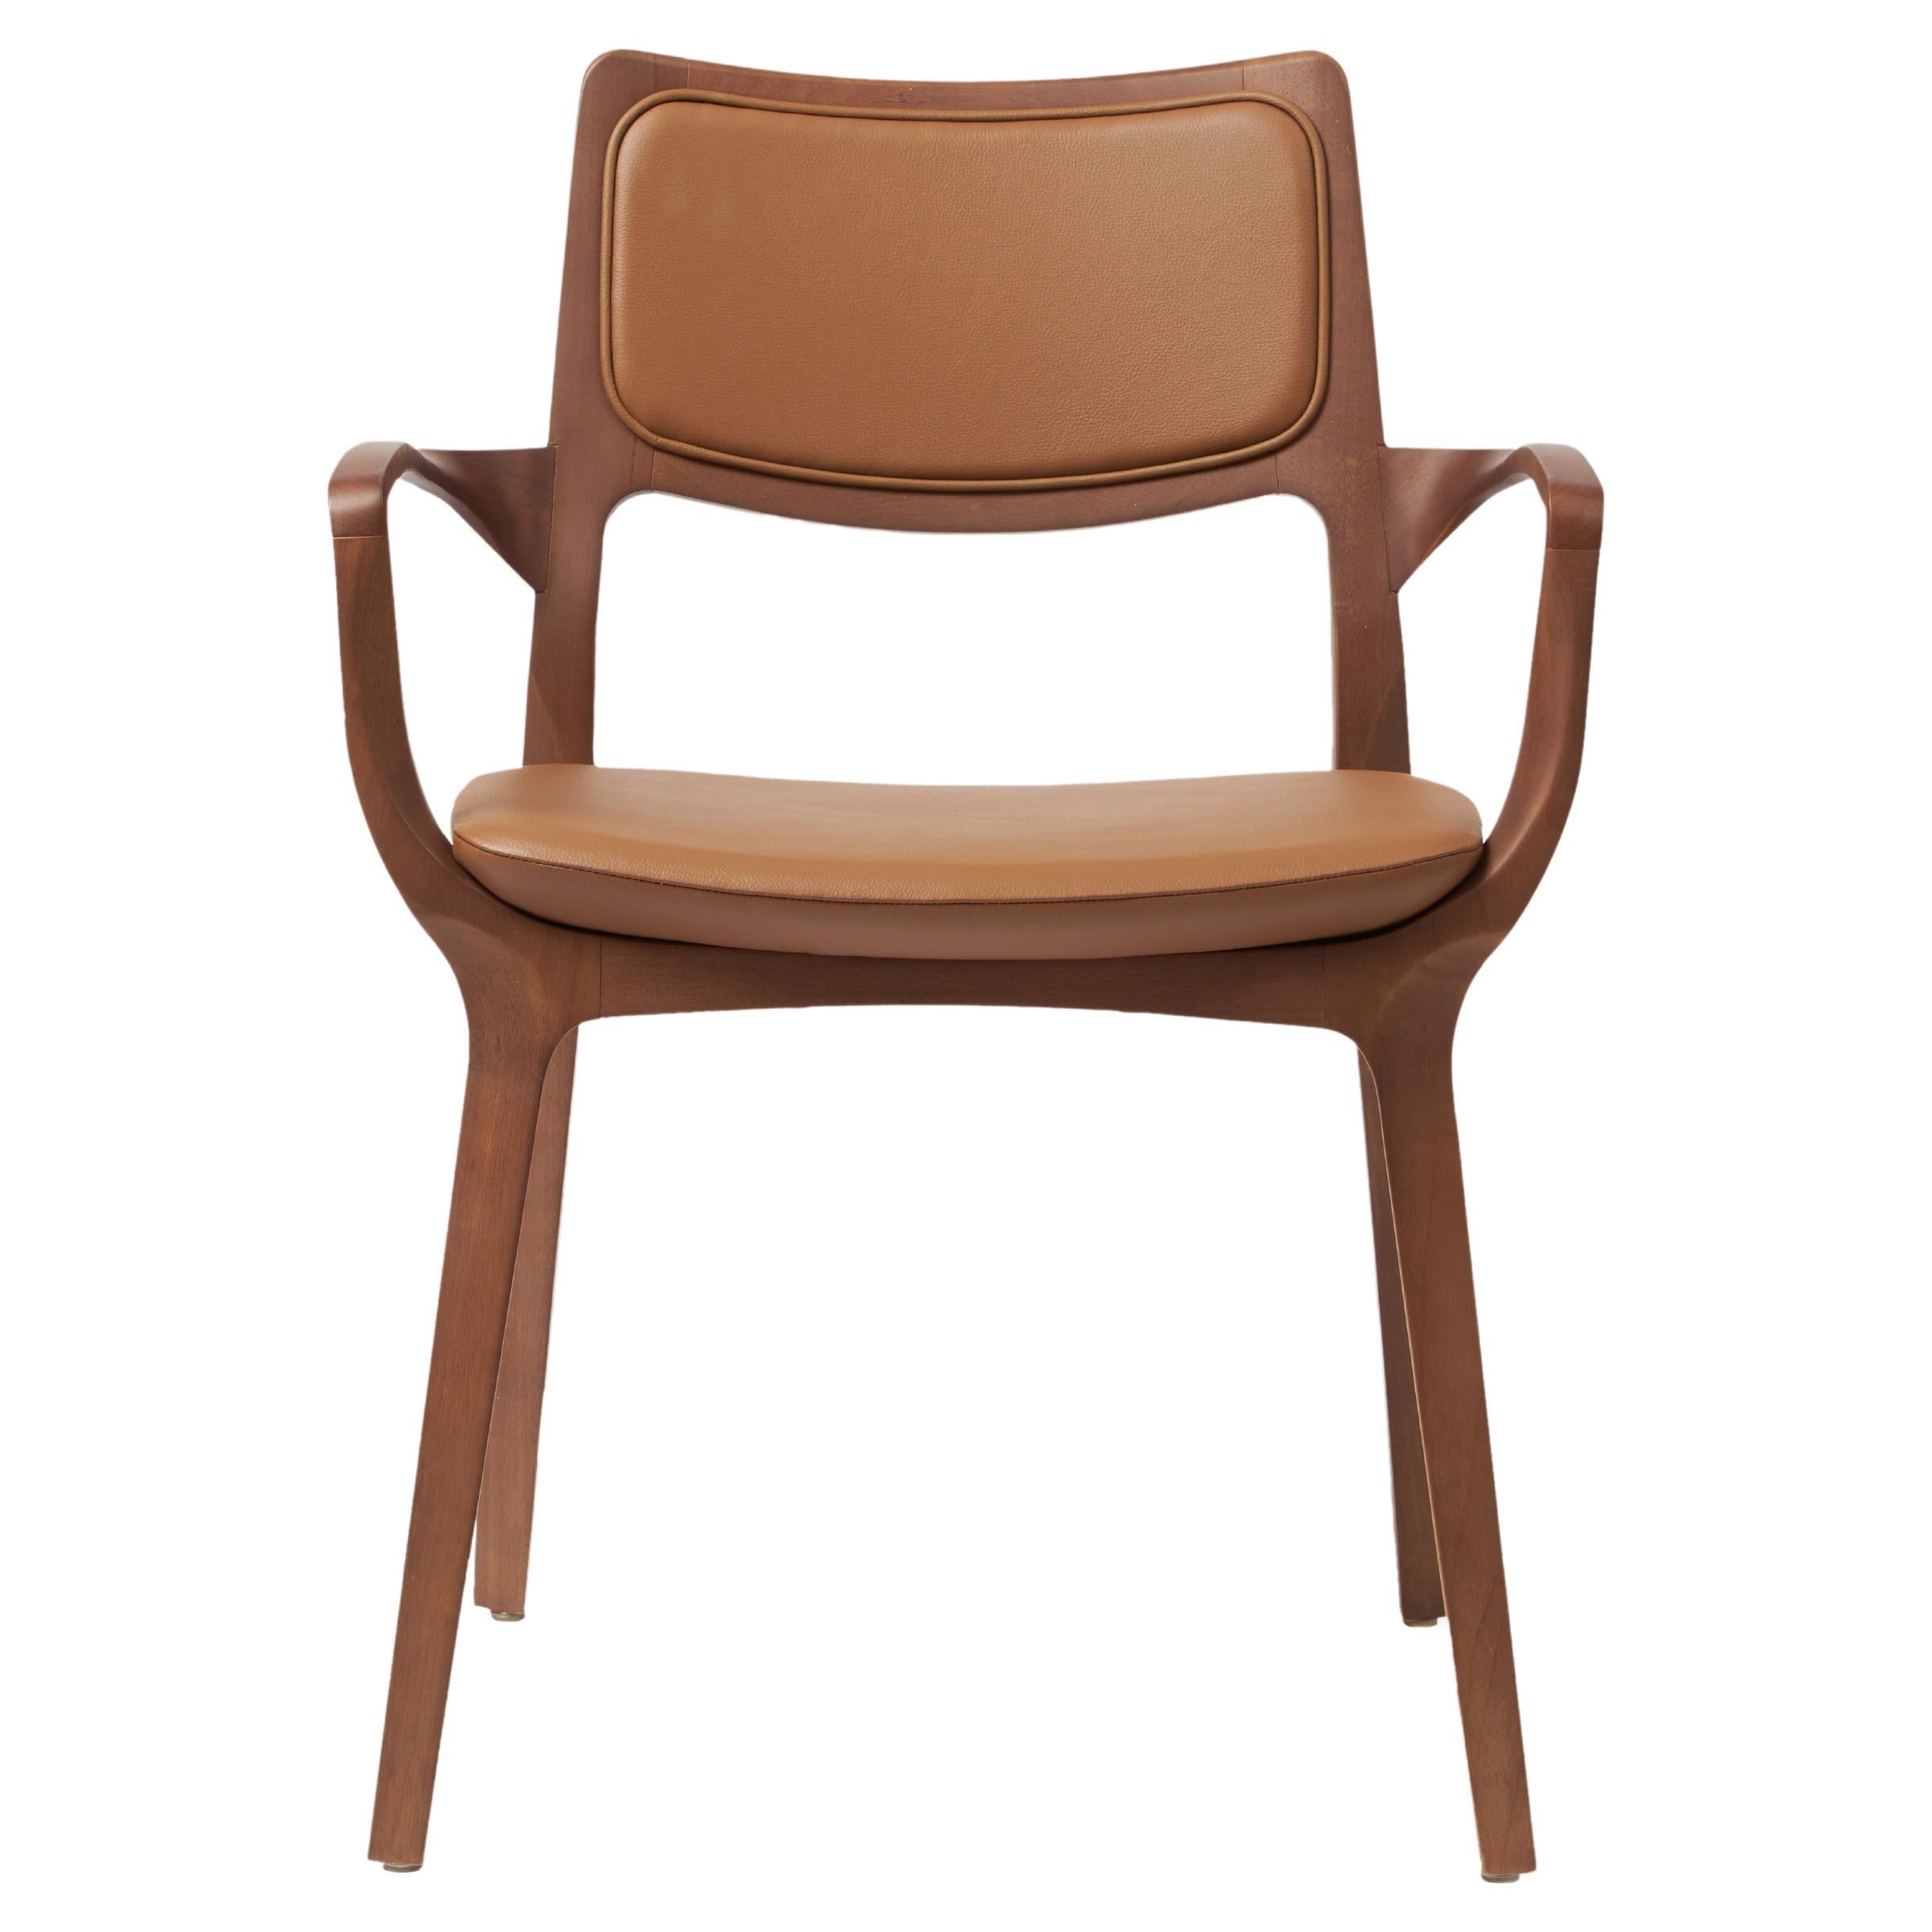 Modern Style Aurora Chair Sculpted in Walnut Finish Arms, leather back & seating For Sale